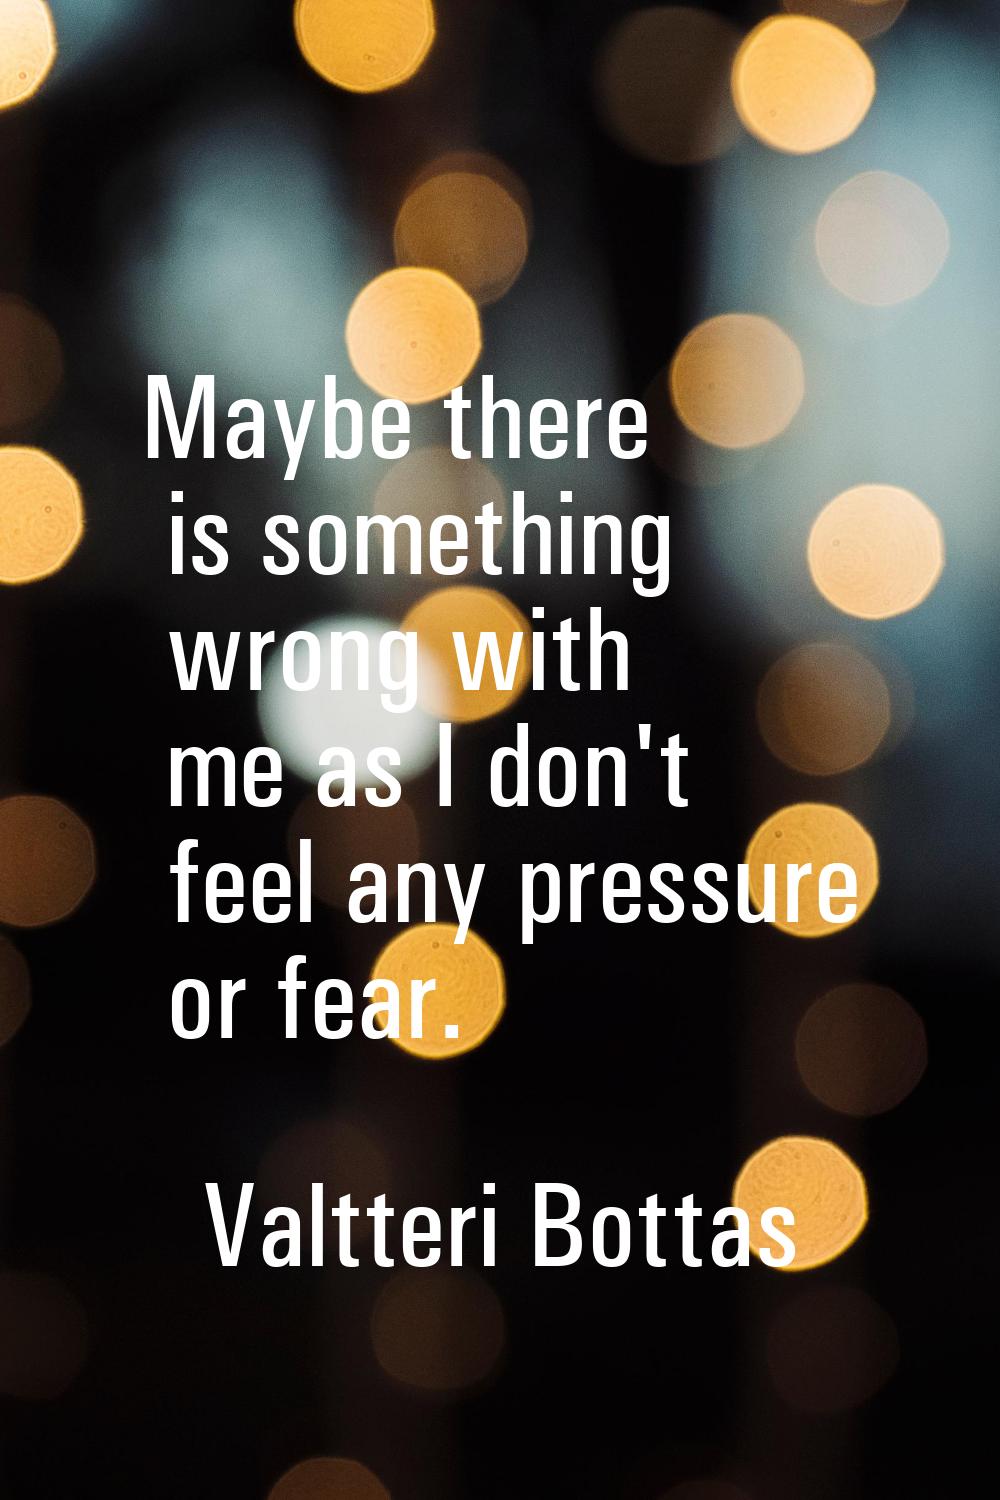 Maybe there is something wrong with me as I don't feel any pressure or fear.